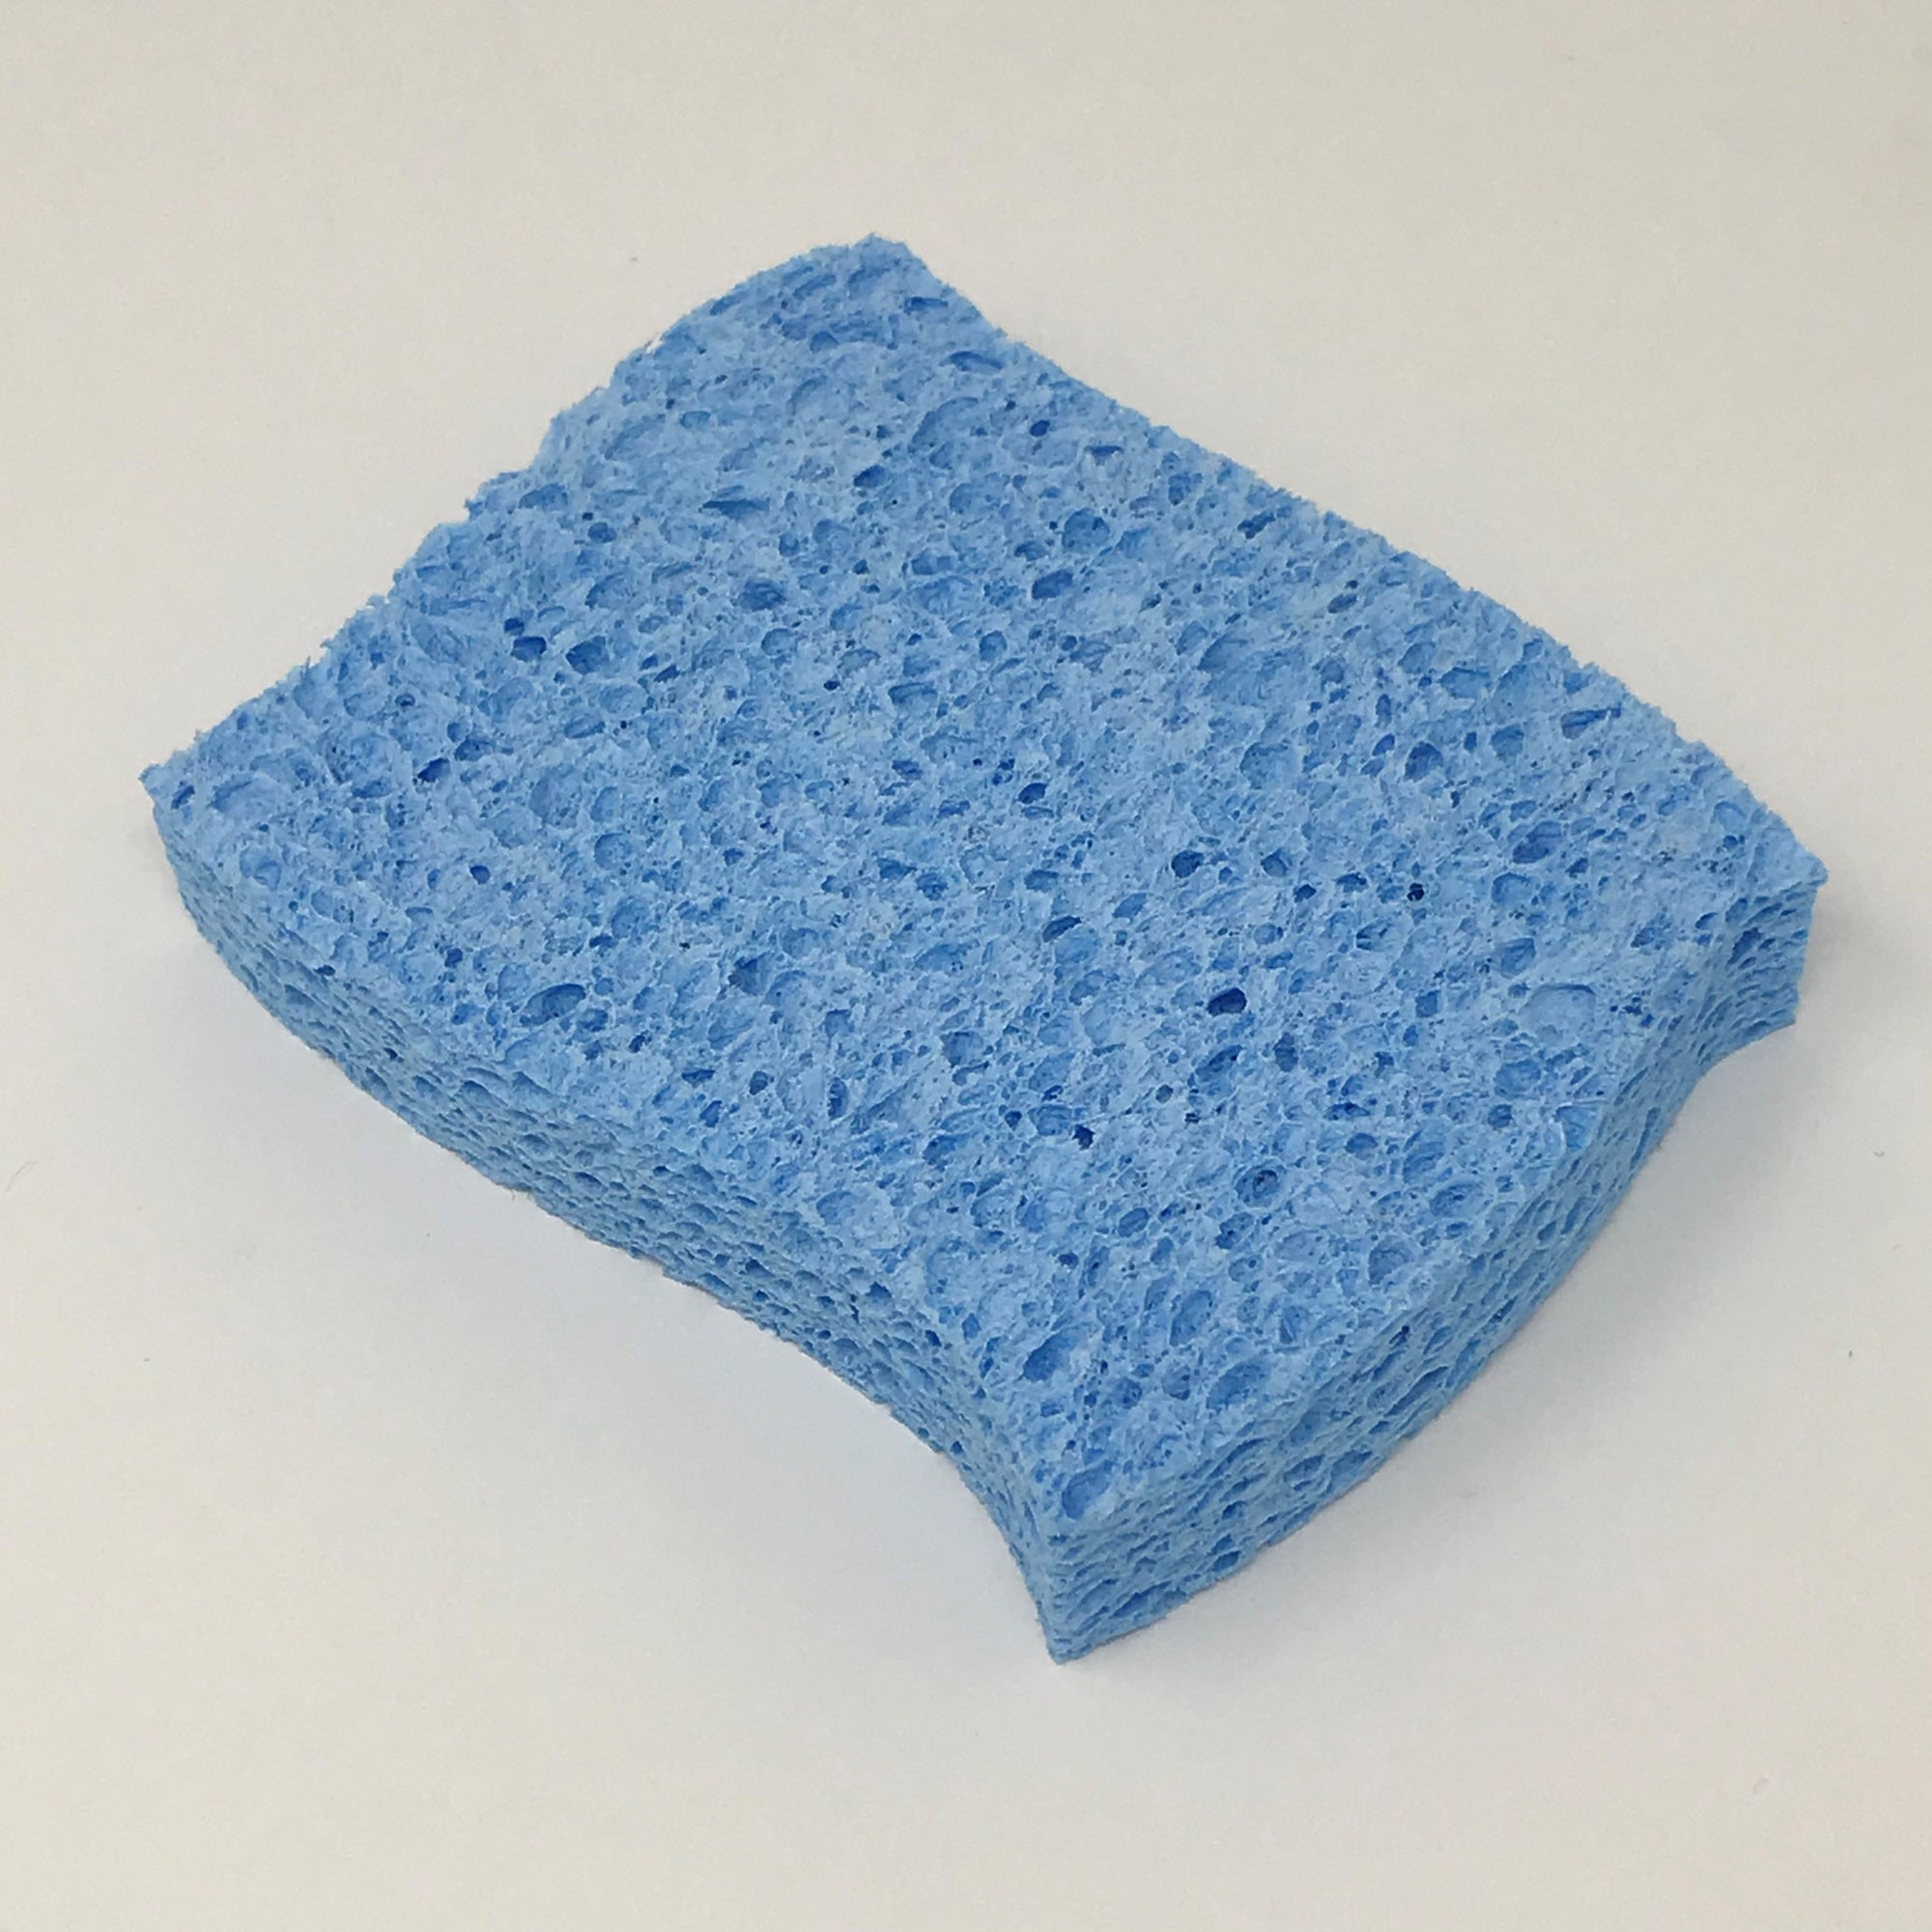 Ethical Earth EE101 Compostable Sponge Bathroom - Premium Scourers / Sponges from FMCG Global - Just $3.95! Shop now at W Hurst & Son (IW) Ltd